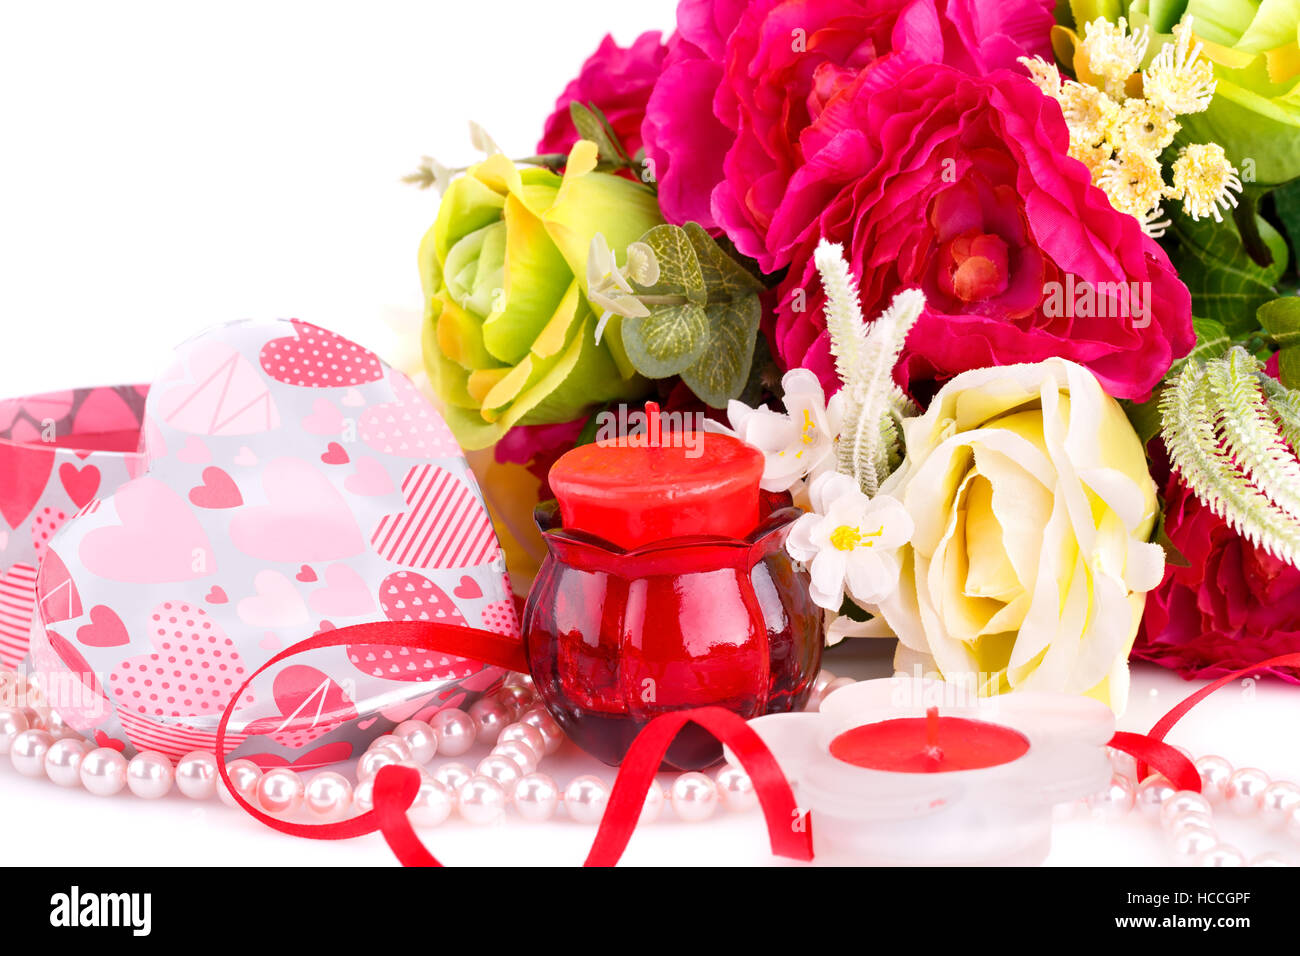 Colorful flowers, candles and gift box close up picture. Stock Photo